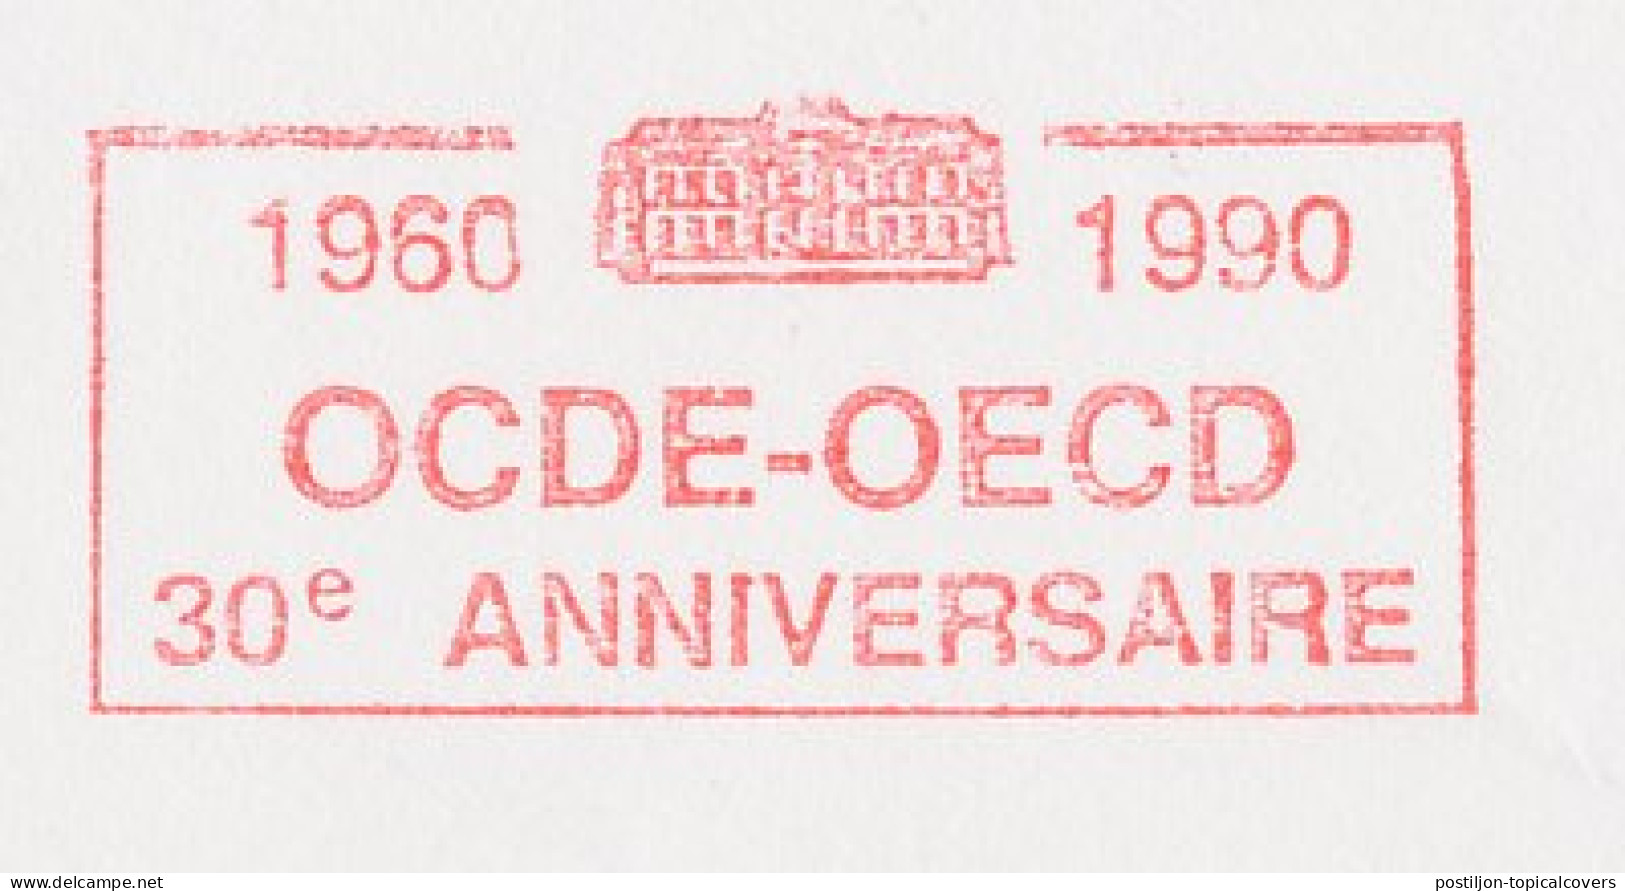 Meter Cover France 1992 OECD - Organisation For Economic Co-Operation And Developement  - Unclassified